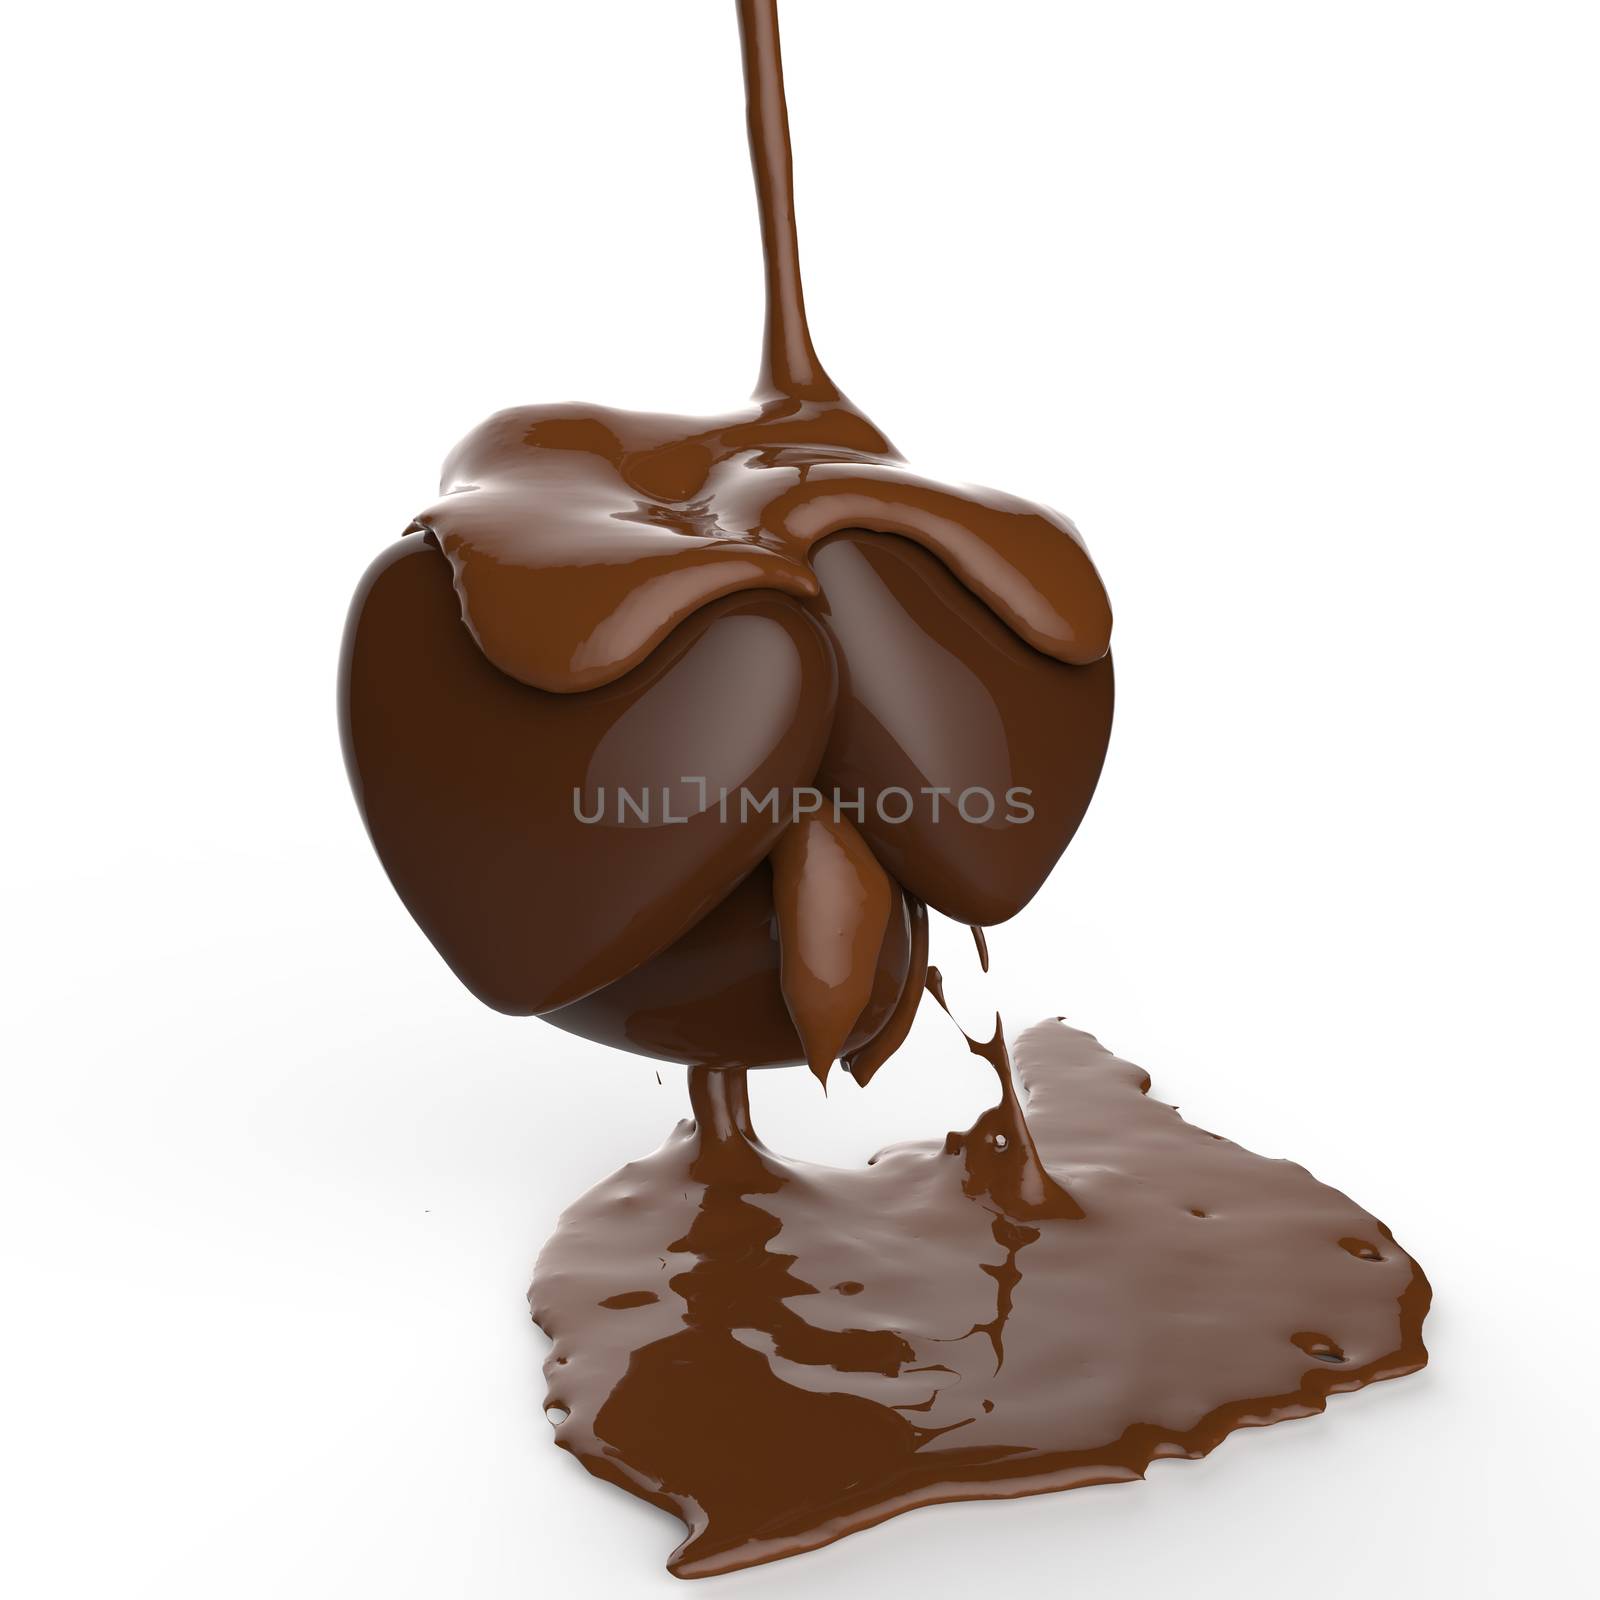 close up chocolate syrup leaking over heart shape symbol on white background